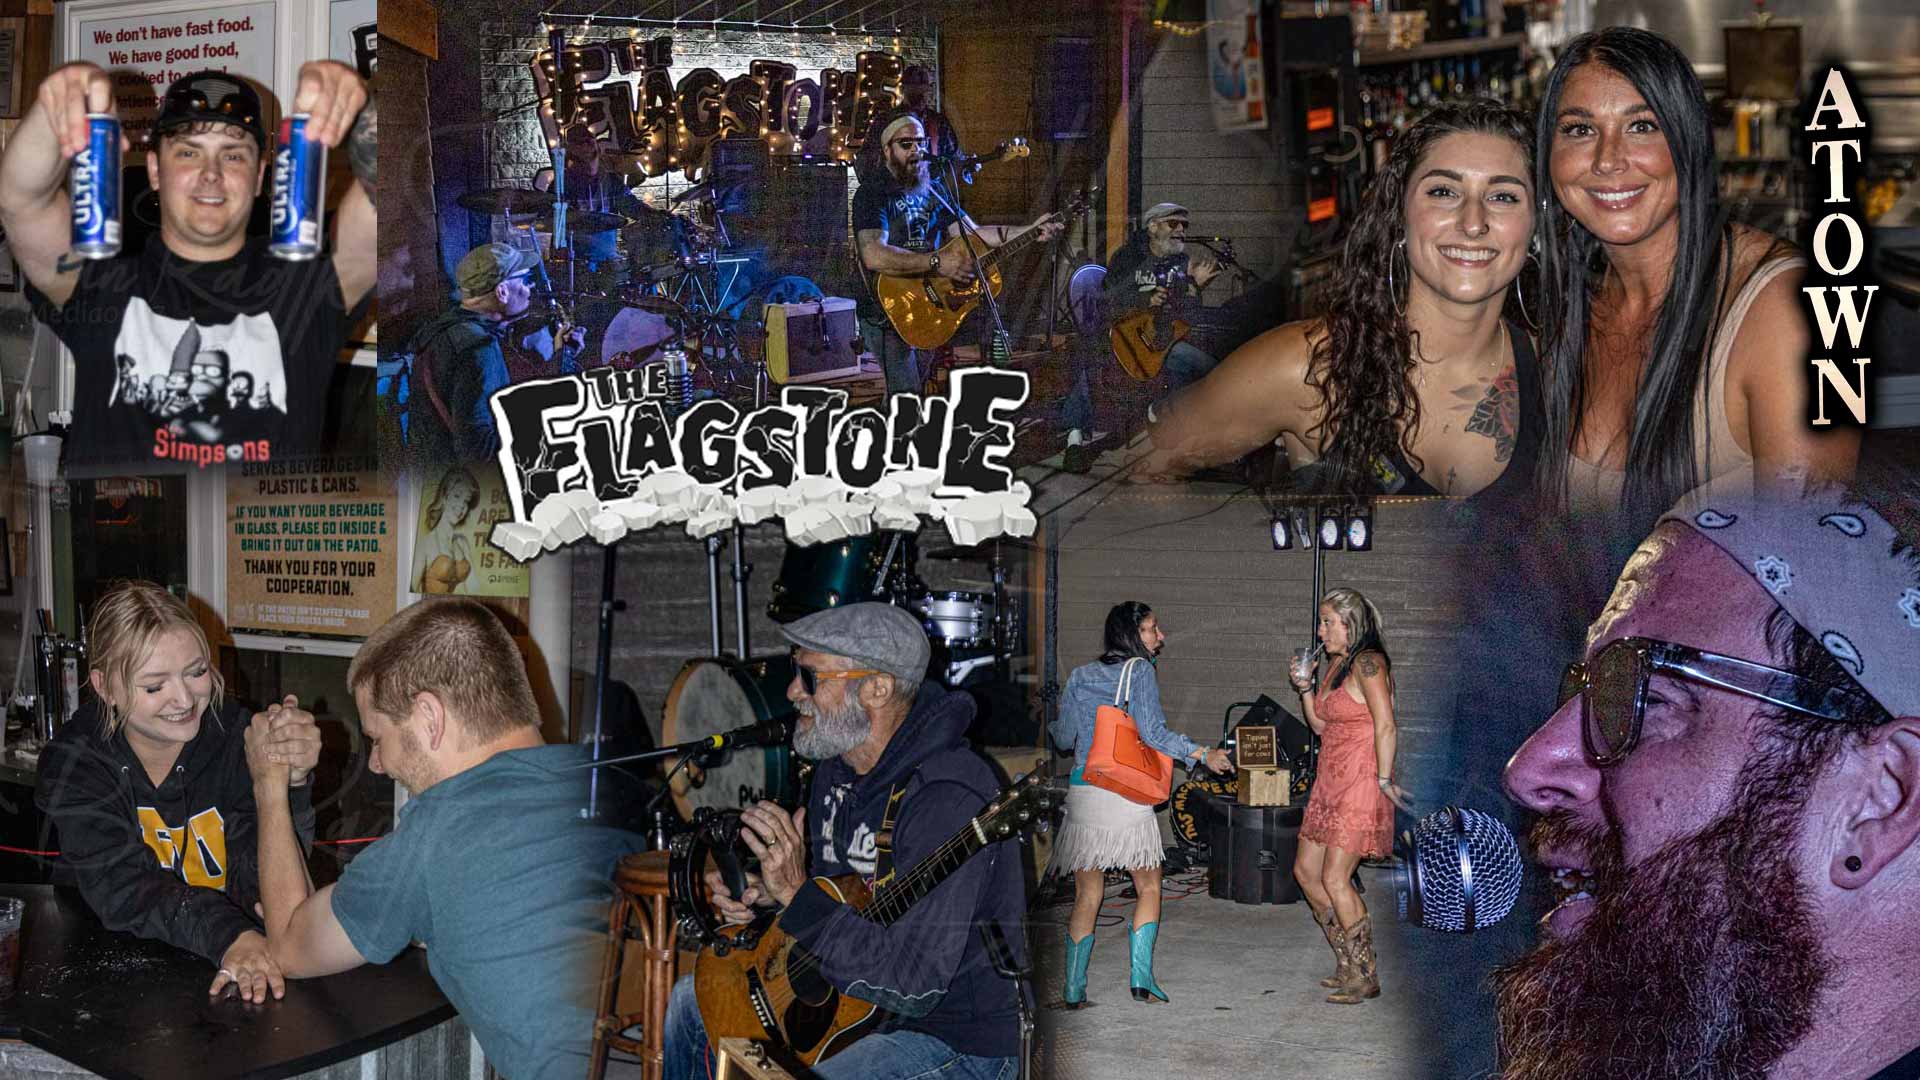 Atown band at Flagstone bar and Grill in Appleton WI